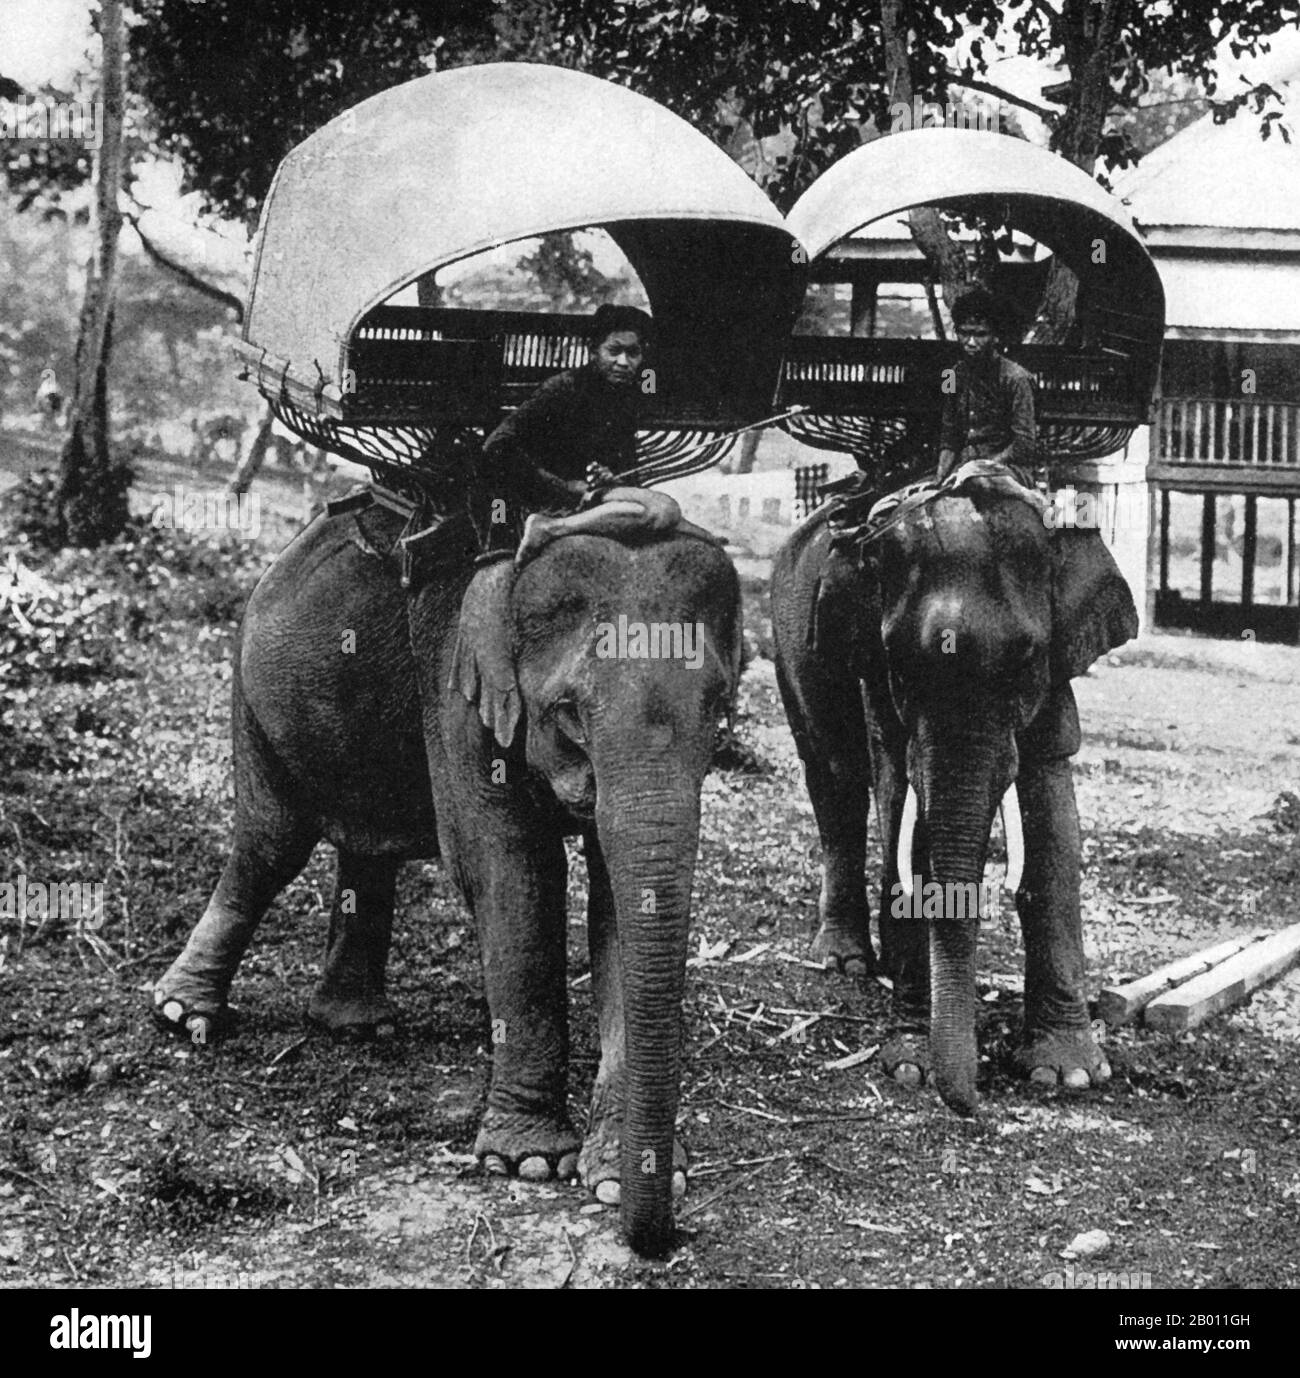 Thailand: Asian elephants saddled with howdahs in preparation for an excursion, Siam, late 19th century.  In the 19th century, the Asian Elephant held a prominent position in Siam, although they were hunted regularly north of Ayutthaya and the Lao States (present day, Chiang Mai province and Isan). Not only were elephants used as beasts of burden in agriculture and for hauling timber, but they were active in war leading cavalry charges against the enemy. Elephants were frequently employed in the Siamese-Burmese wars of the Middle Ages. Stock Photo